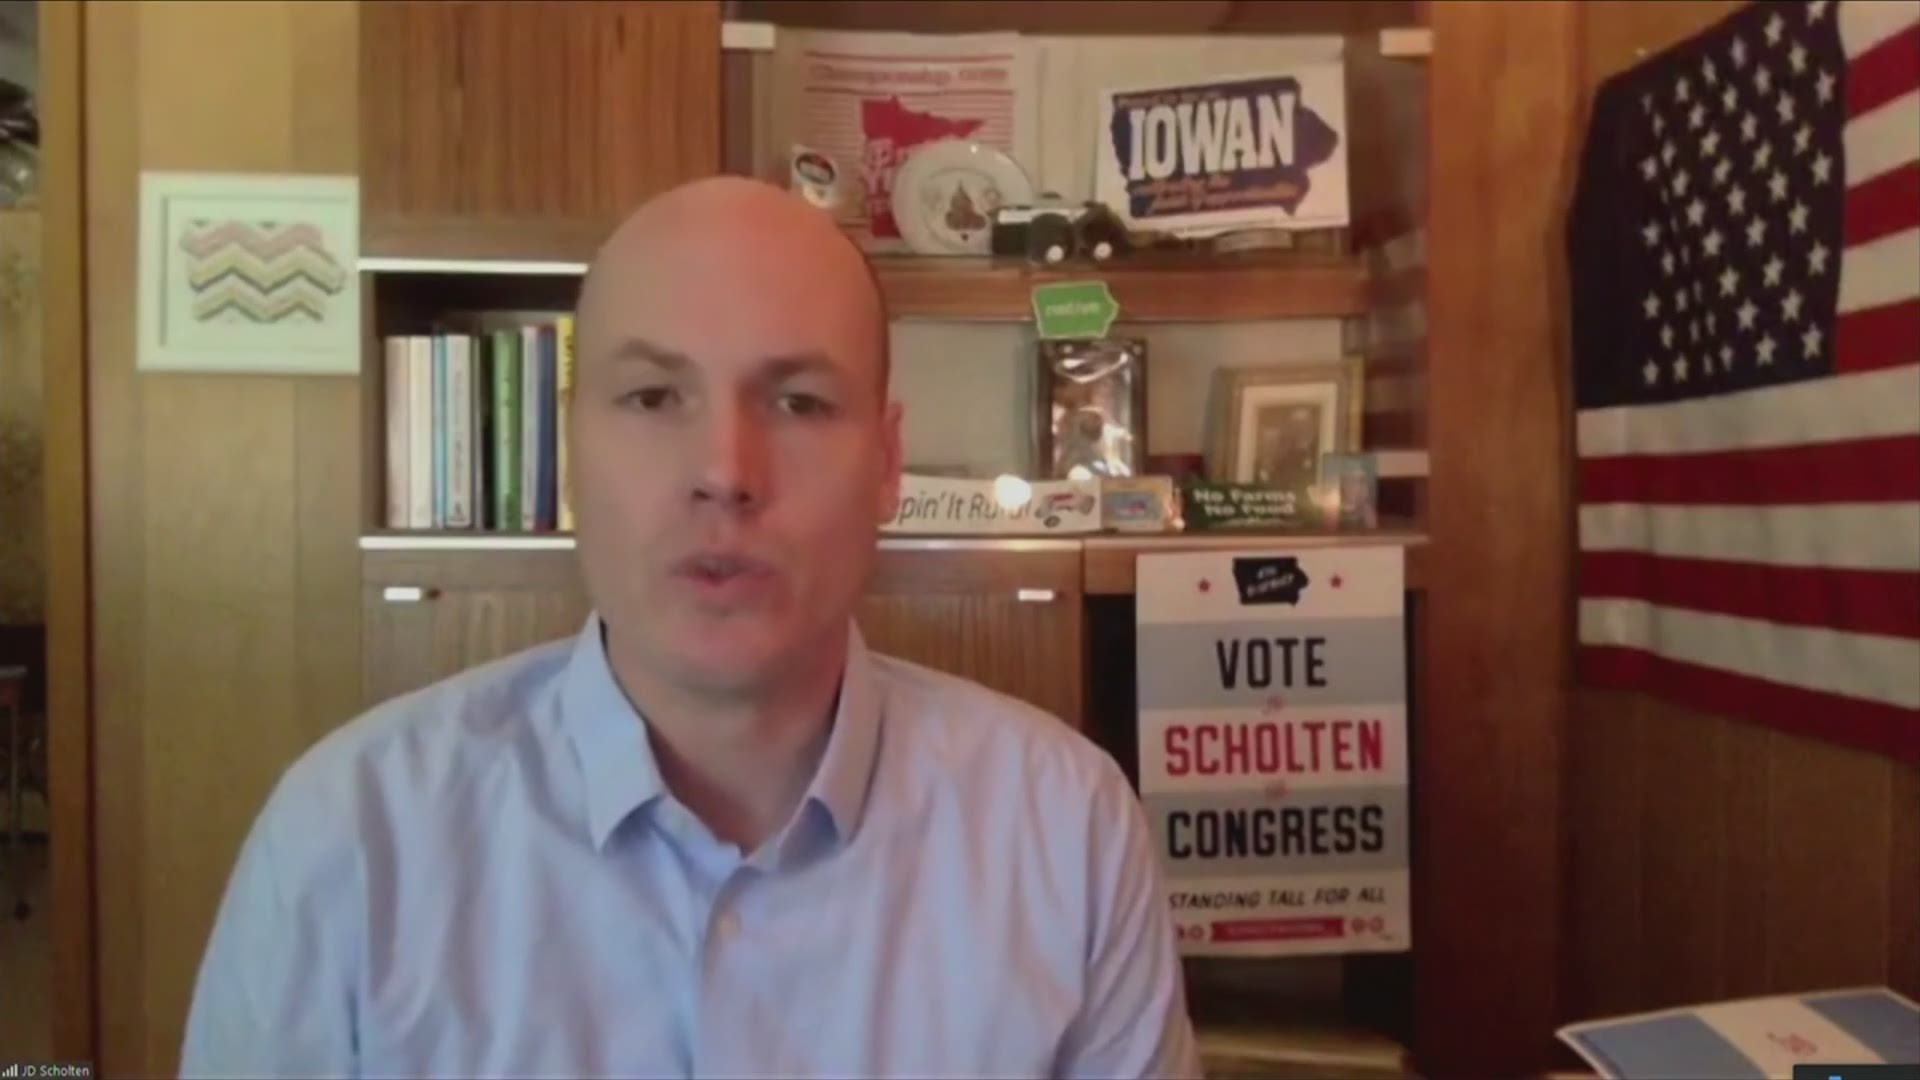 J.D. Scholten, the Democratic candidate for Iowa's 4th District seat, weighs in on incumbent Republican Rep. Steve King losing in the primary Tuesday.